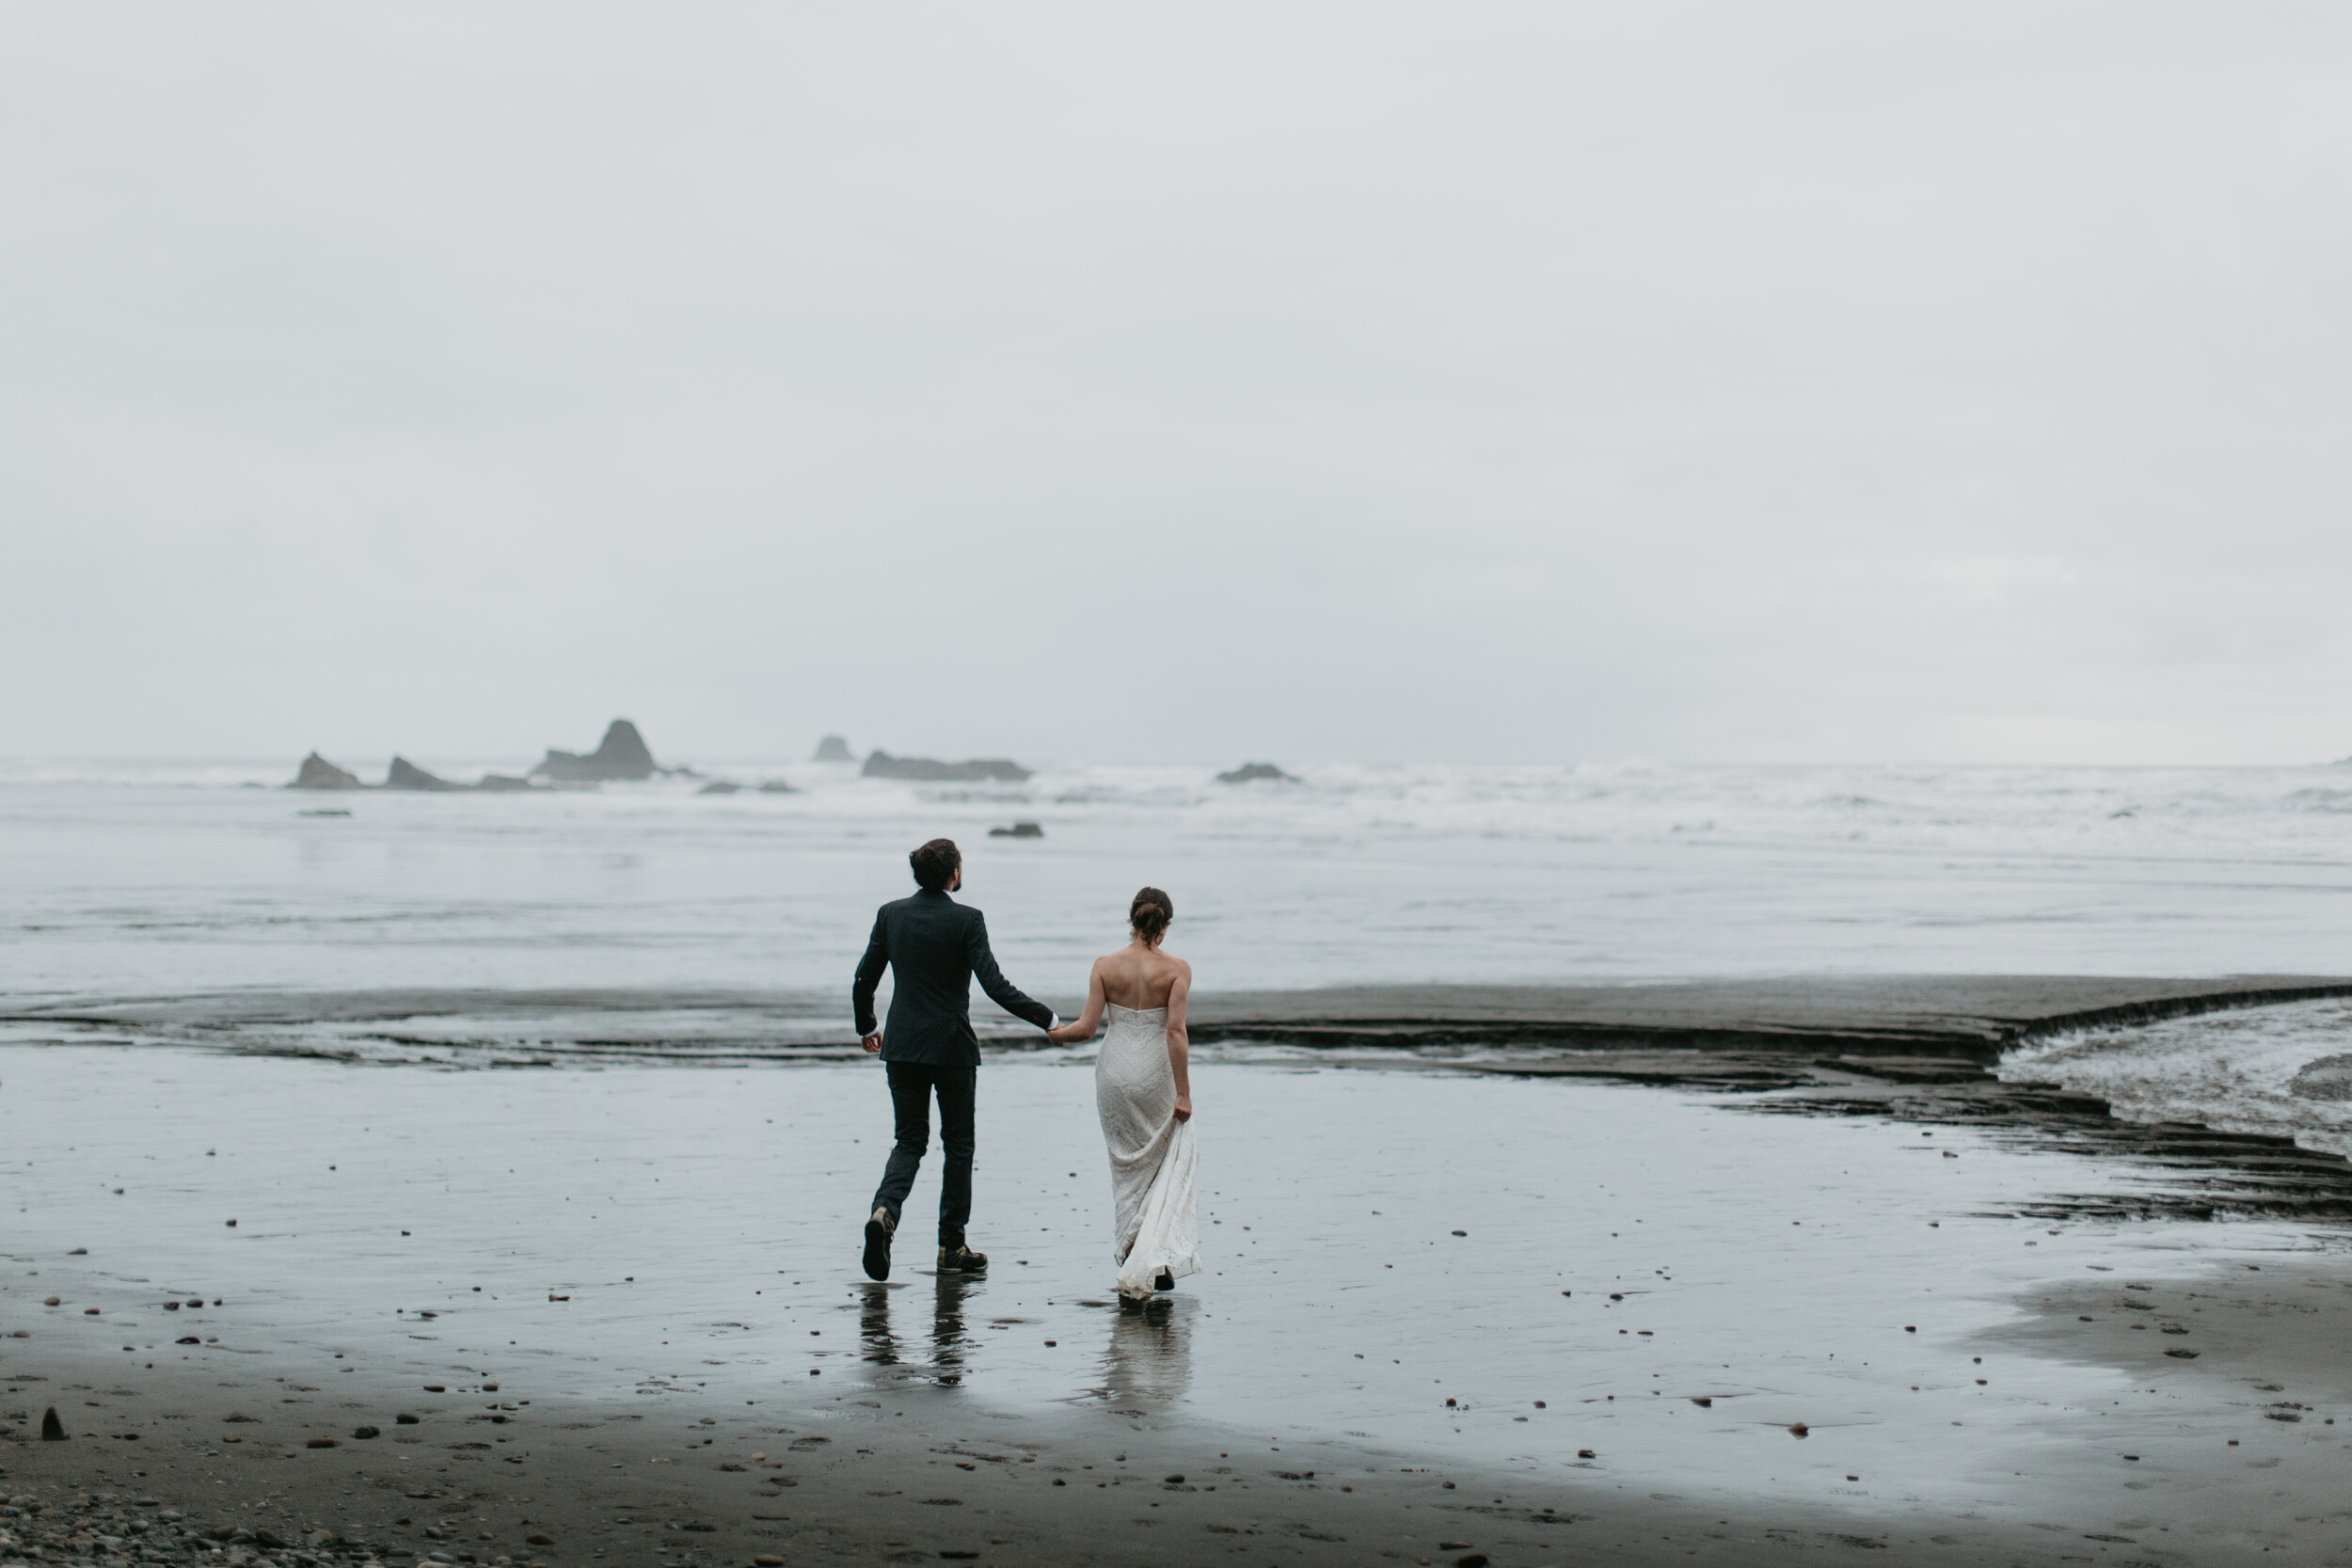 Nicole-Daacke-Photography-Olympic-national-park-elopement-photography-intimiate-elopement-in-olympic-peninsula-washington-state-rainy-day-ruby-beach-hoh-rainforest-elopement-inspiration-rainforest-pnw-elopement-photography-168.jpg